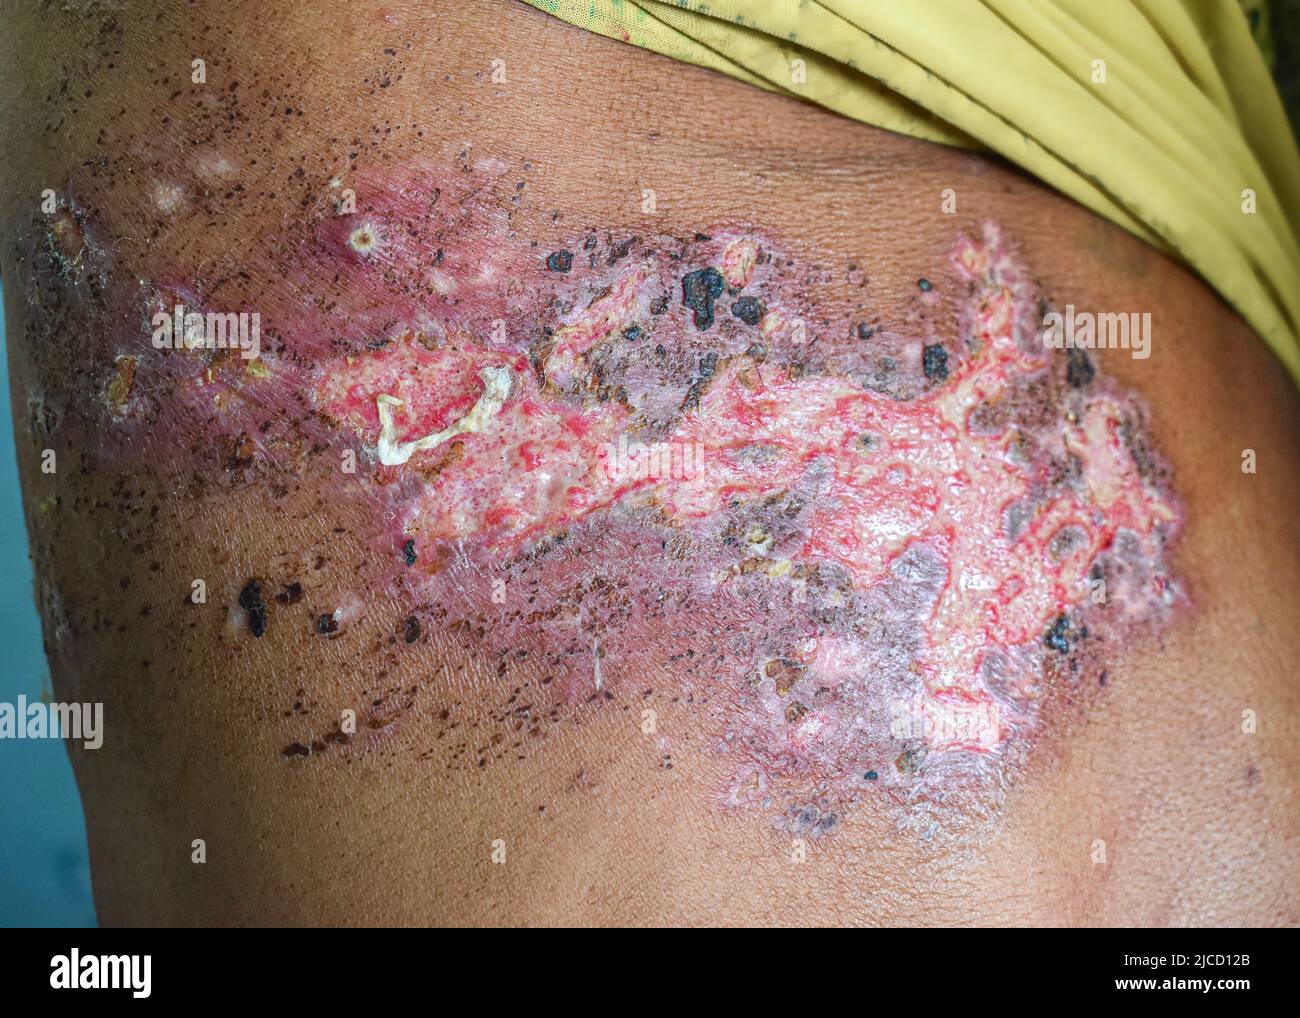 Herpes simplex infection at chest and abdomen of Asian man. Stock Photo